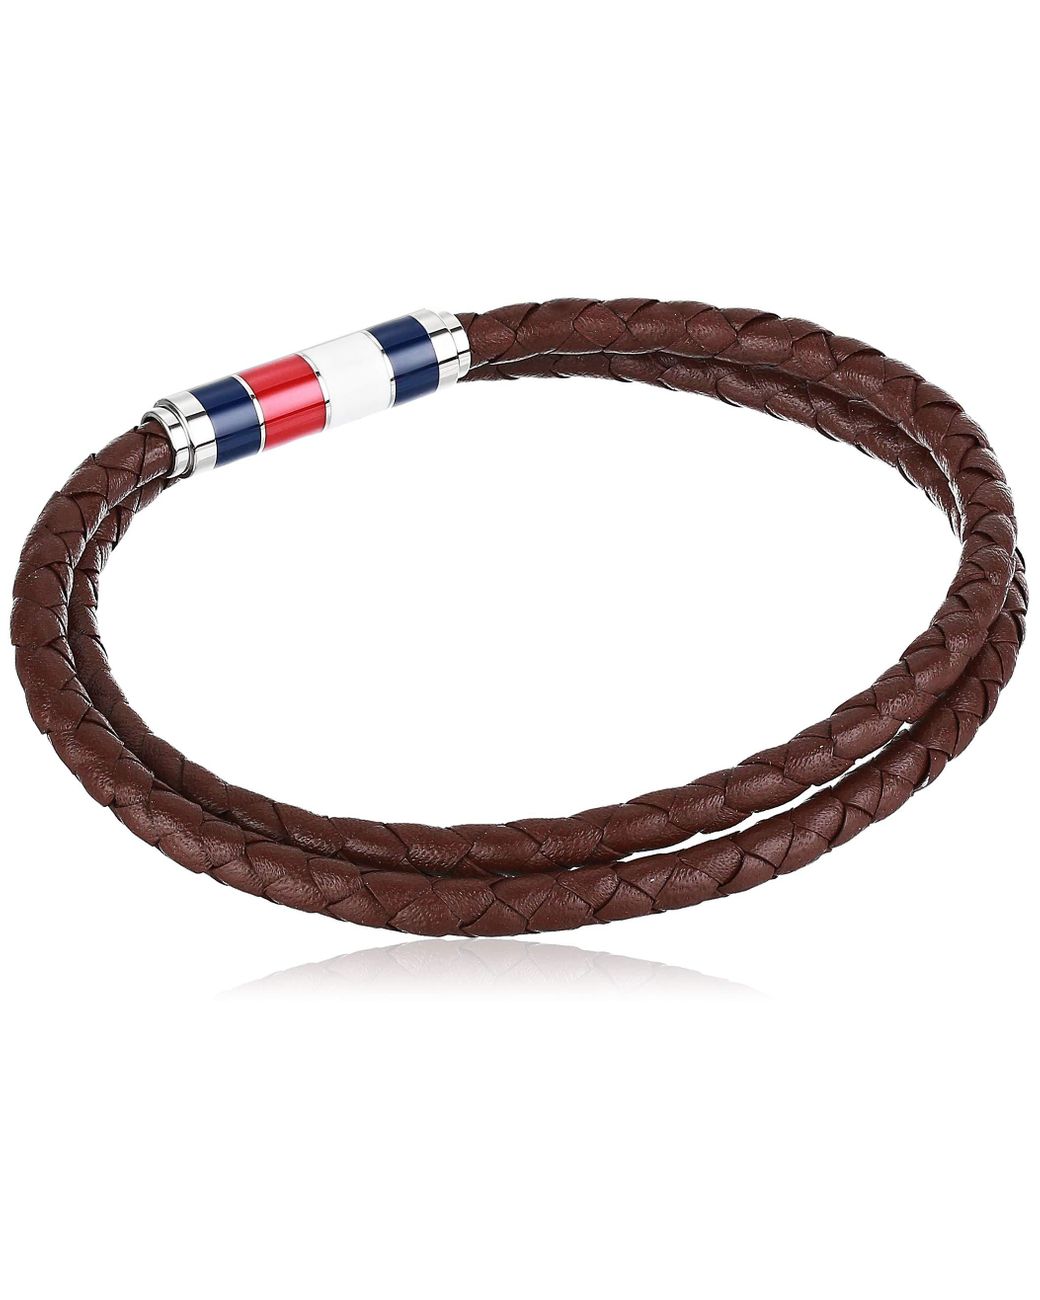 Tommy Hilfiger Jewelry Leather Double Wrap Bracelet in Brown for Men - Lyst